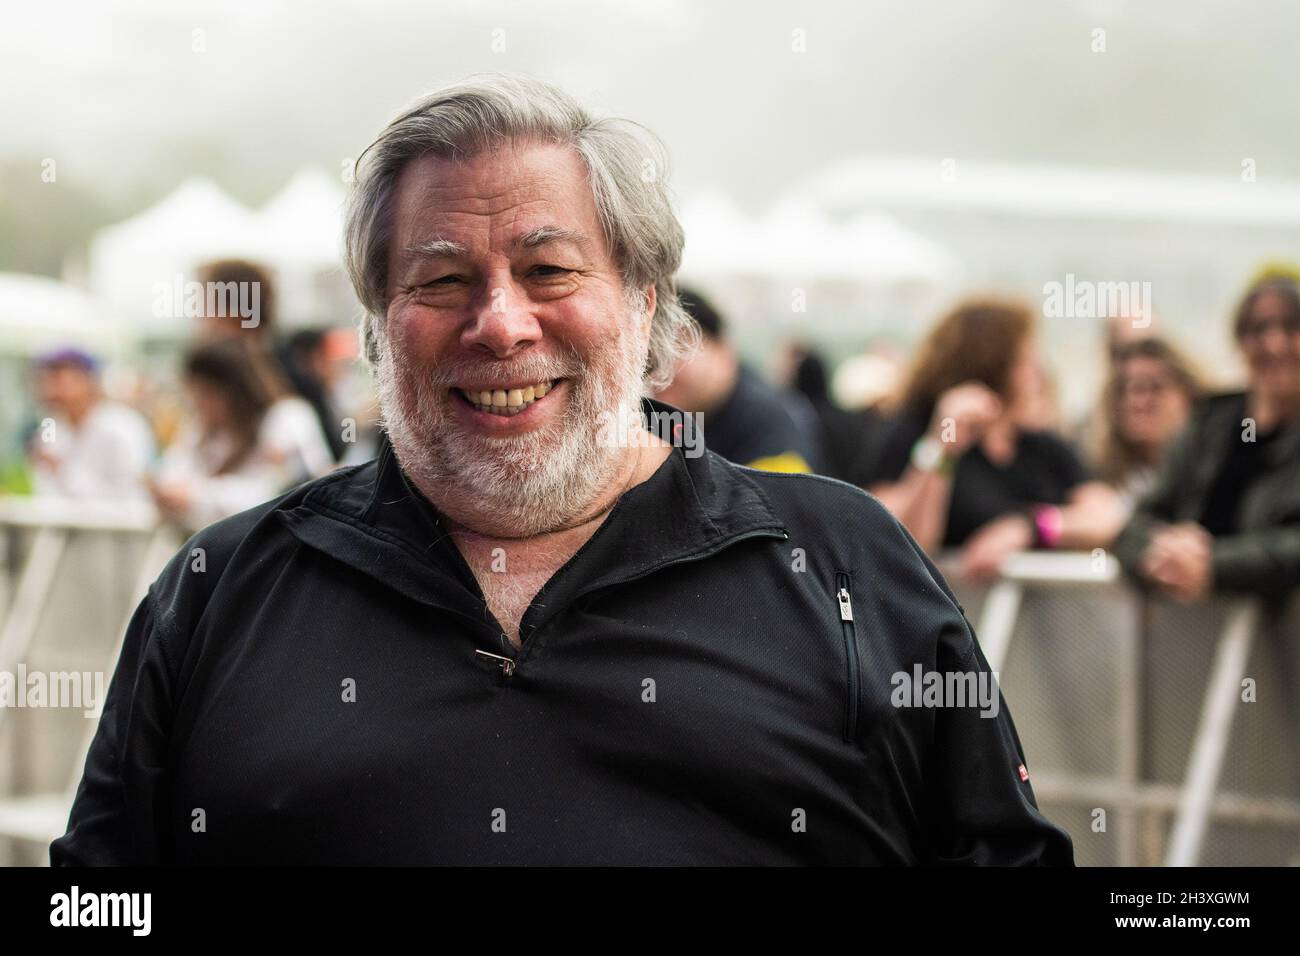 San Francisco, California, USA. 29th Oct, 2021. Steve Wozniak attends the 2021 Outside Lands Music and Arts festival at Golden Gate Park on October 29, 2021 in San Francisco, California. Credit: Chris Tuite/Image Space/Media Punch/Alamy Live News Stock Photo